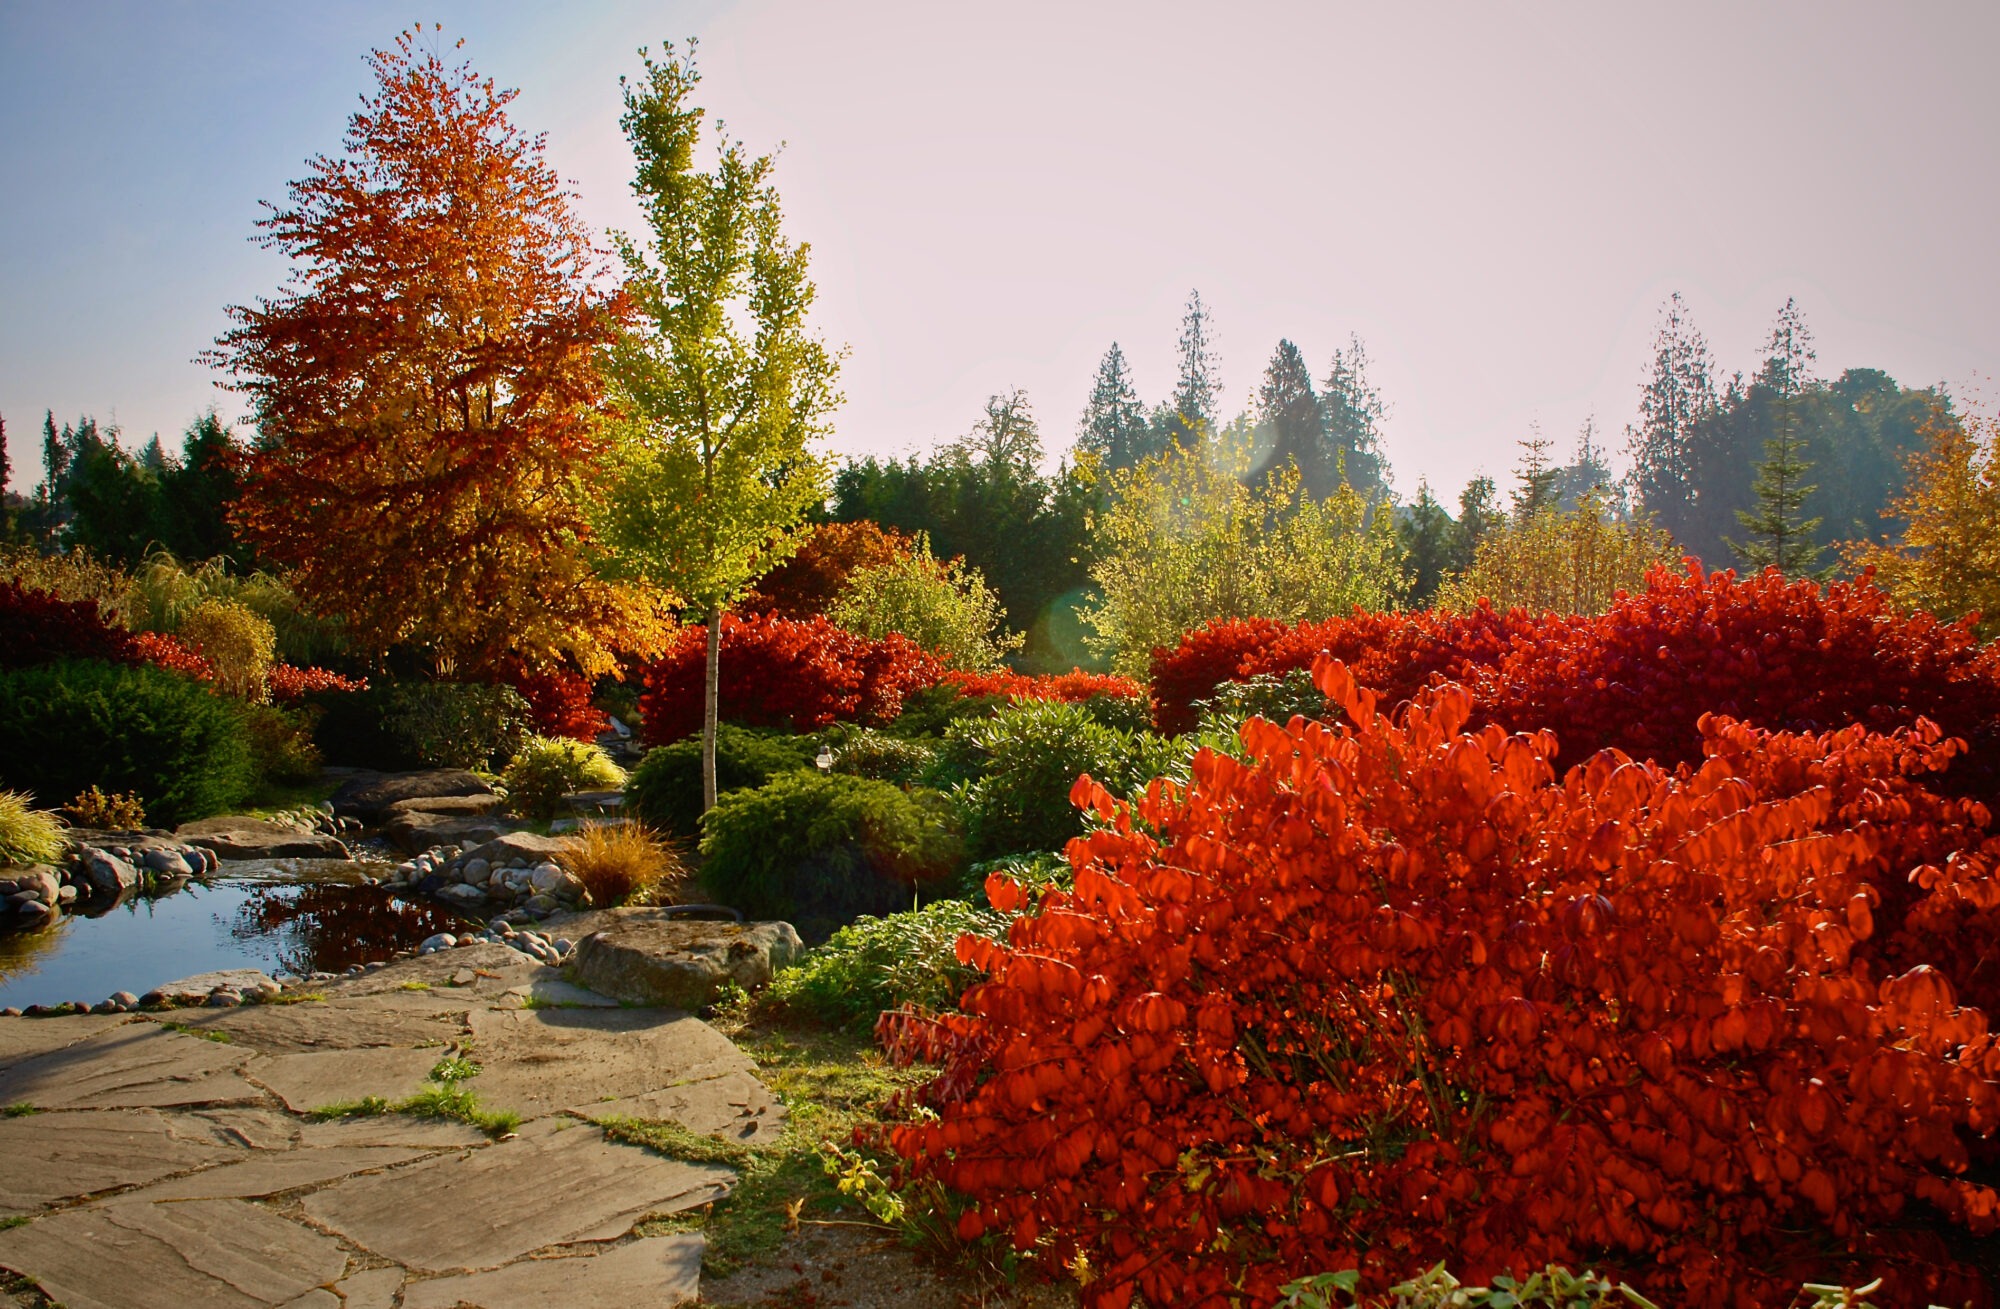 Lush landscape design with paved walkway and pond for Rainier Gardens in Seattle, Washington.